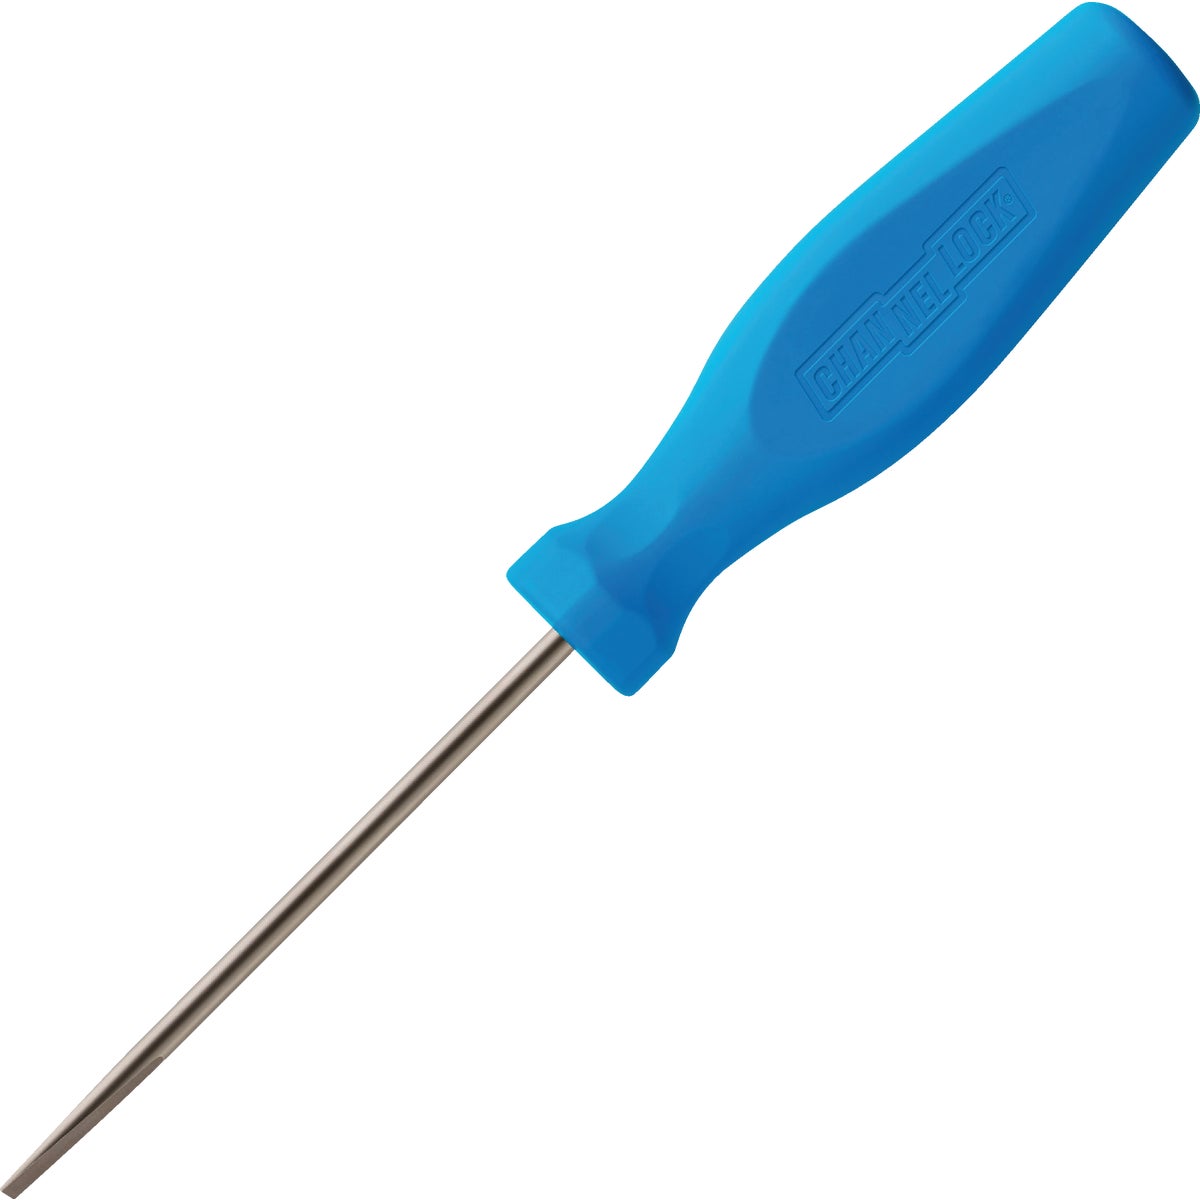 Channellock 1/8 In. x 3 In. Professional Slotted Screwdriver